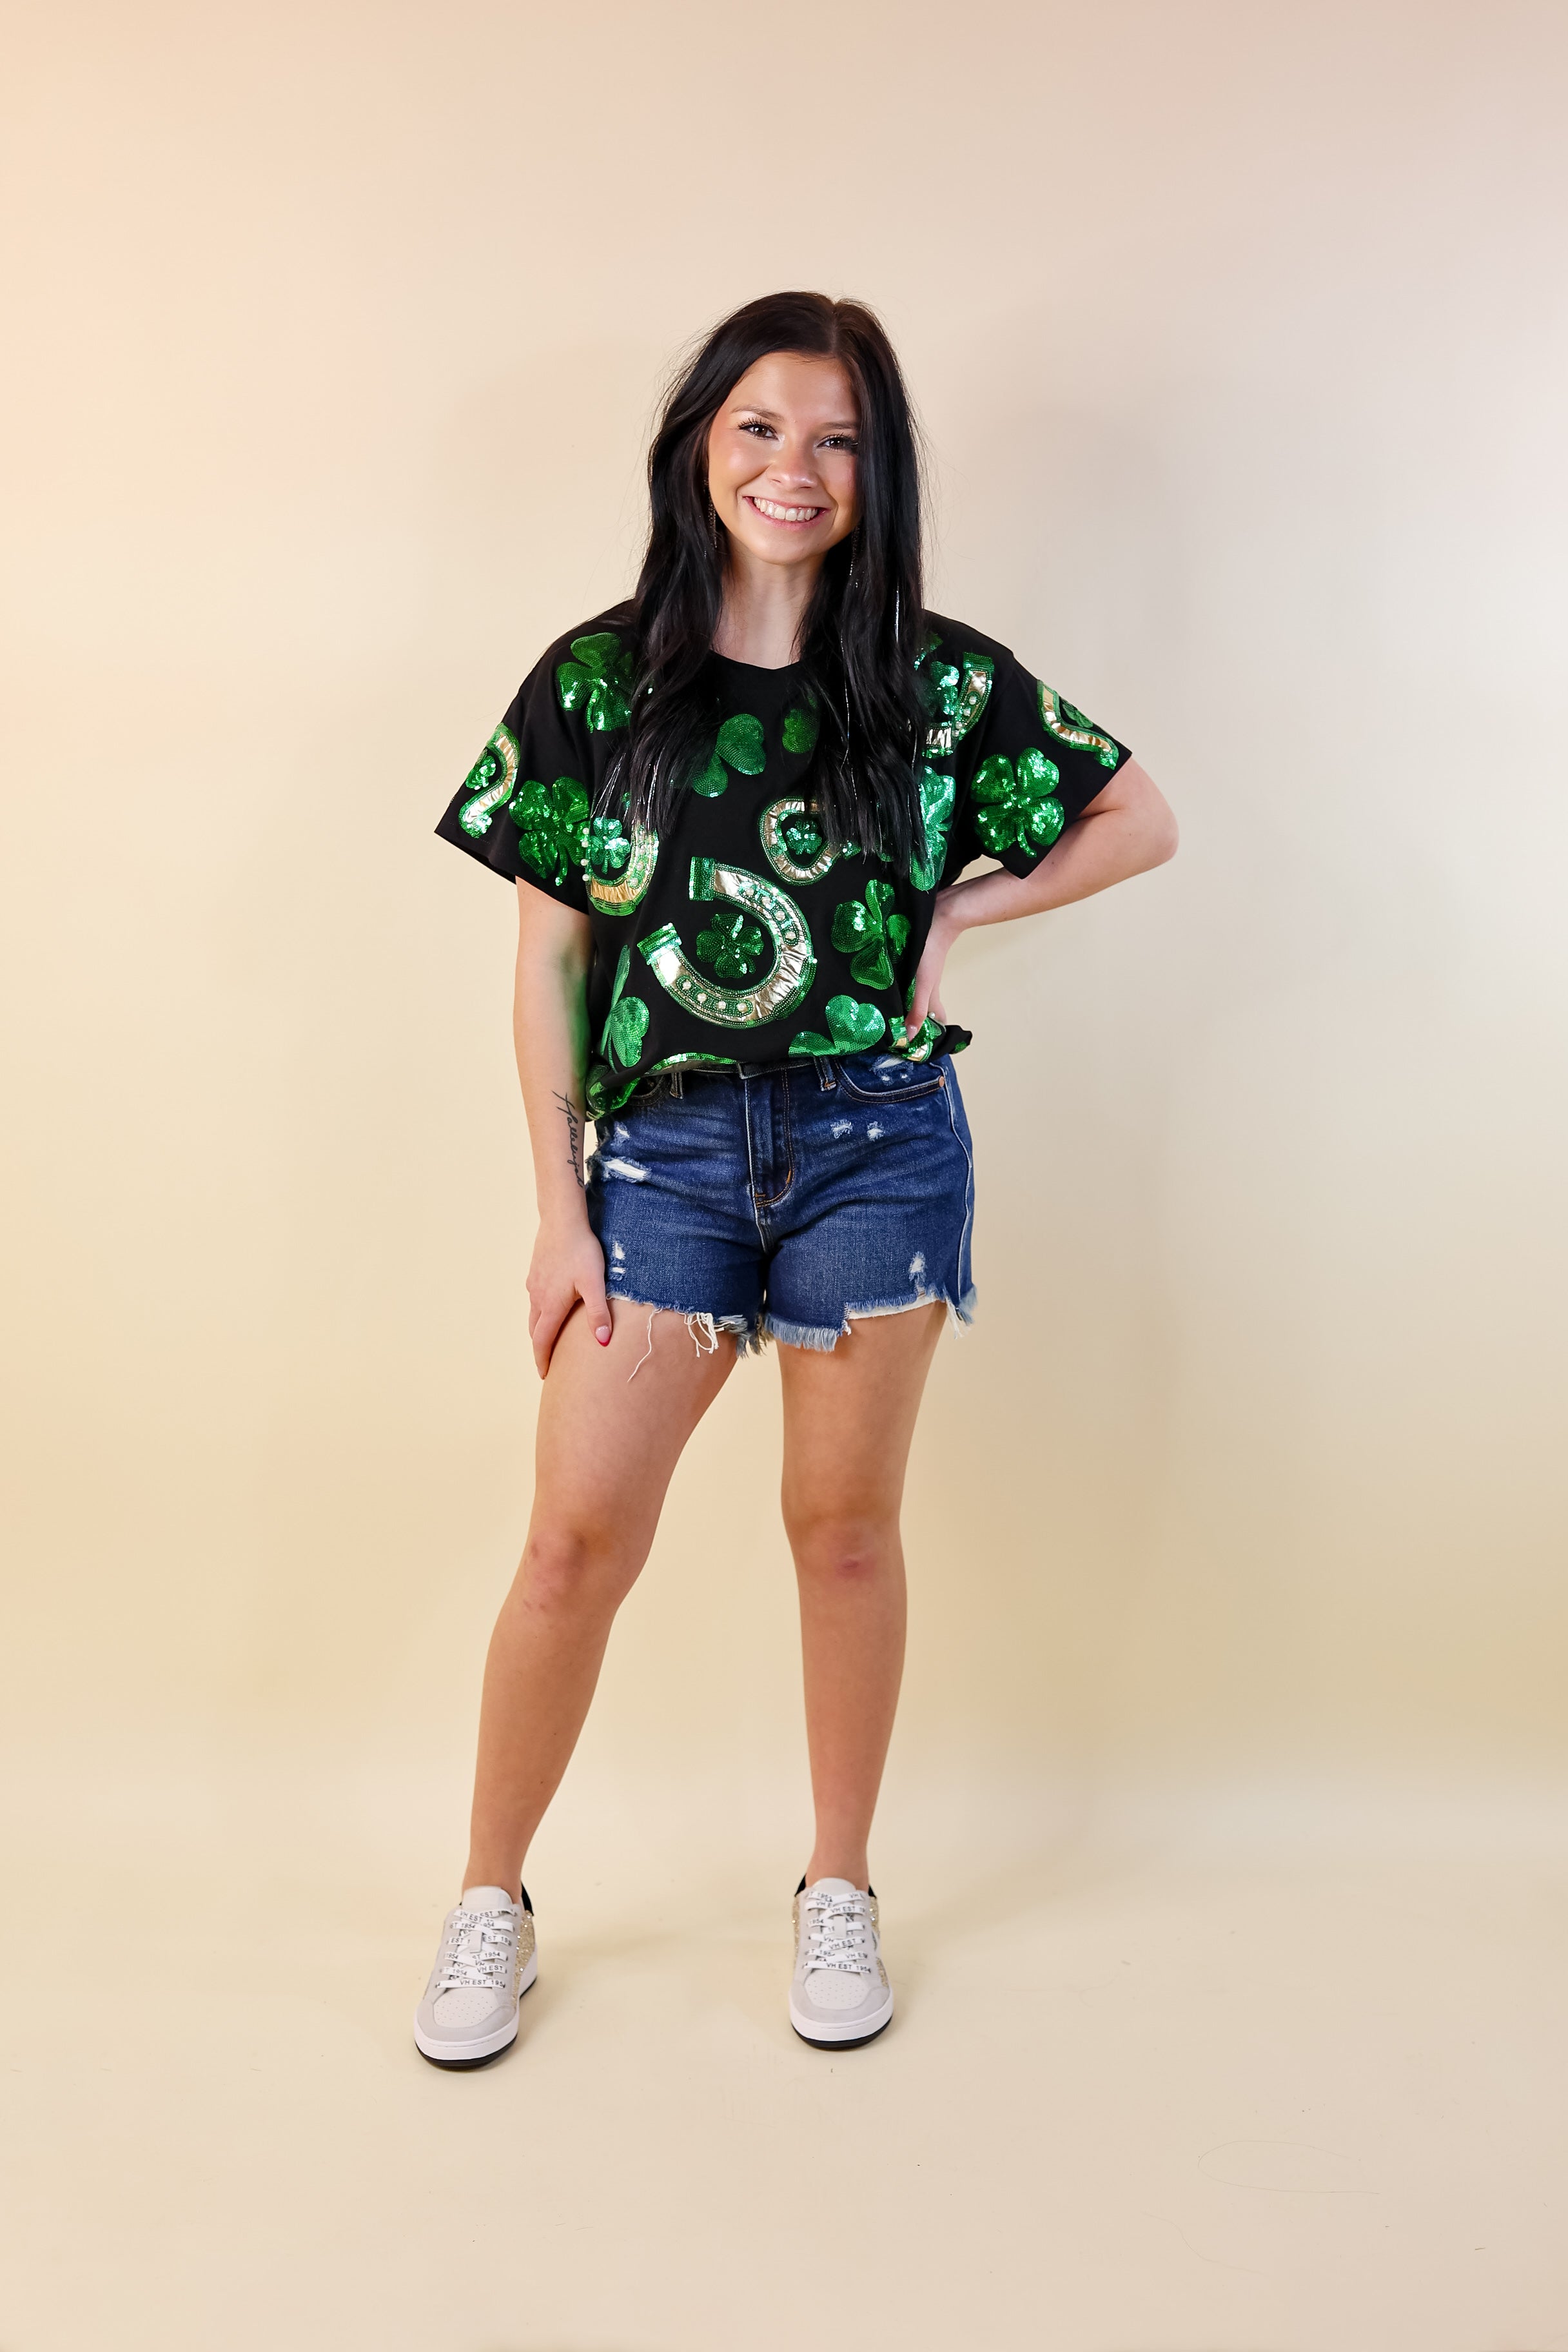 Queen Of Sparkles | Lucky Charm Fully Sequined Clover and Horseshoe Tee in Black - Giddy Up Glamour Boutique